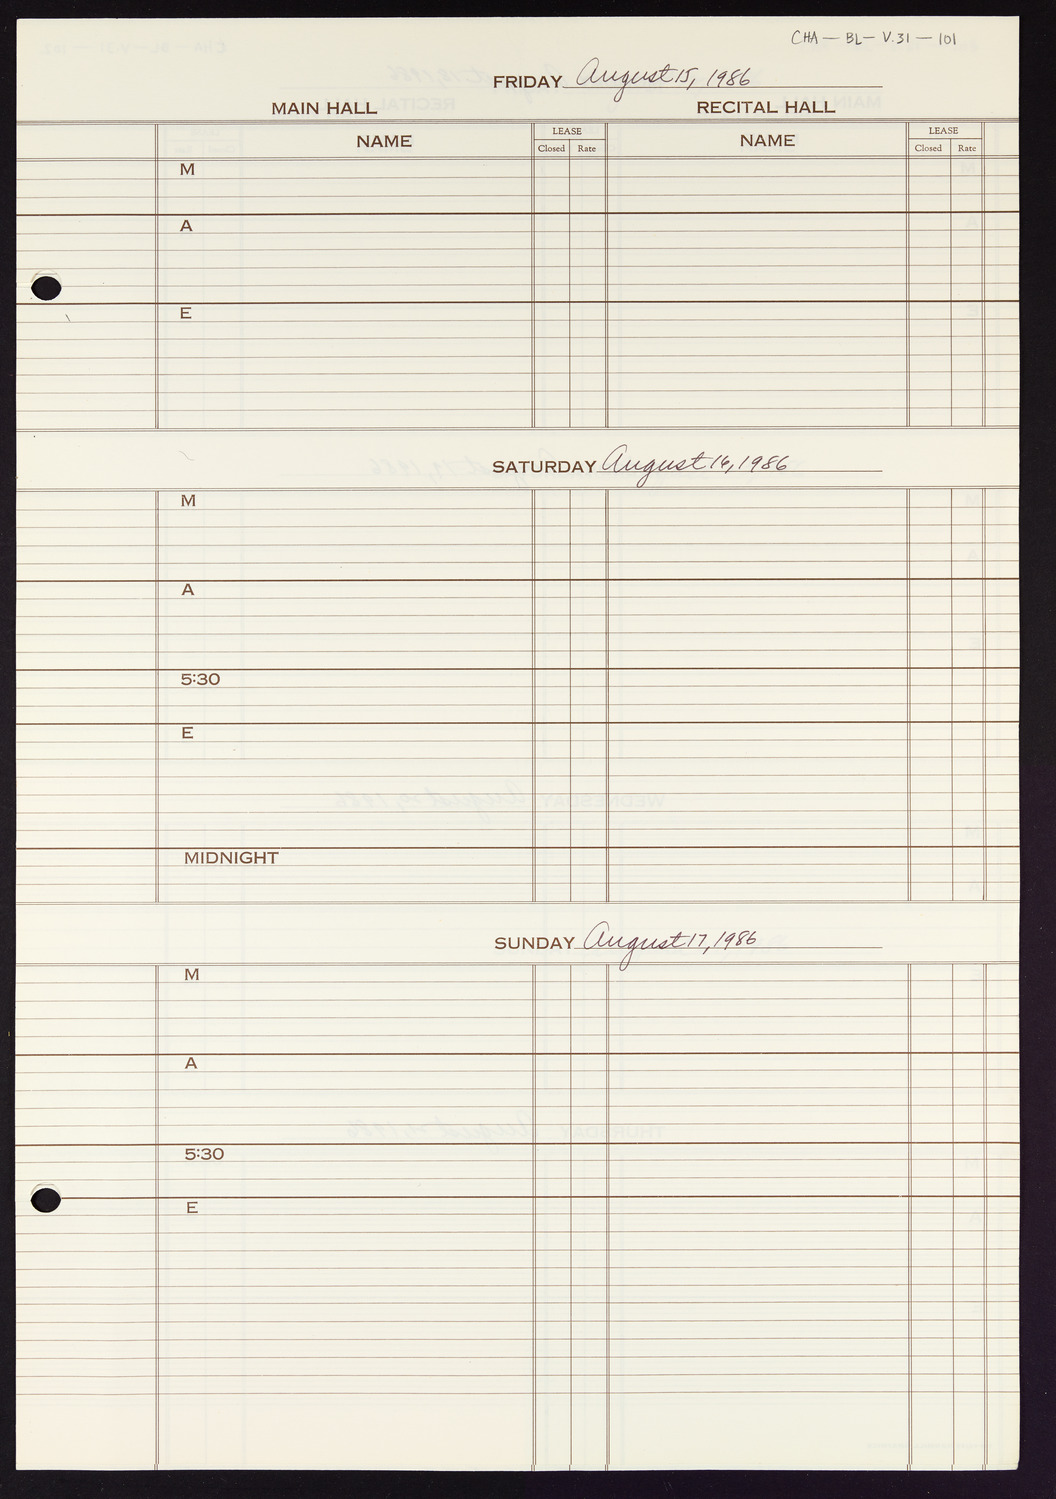 Carnegie Hall Booking Ledger, volume 31, page 101